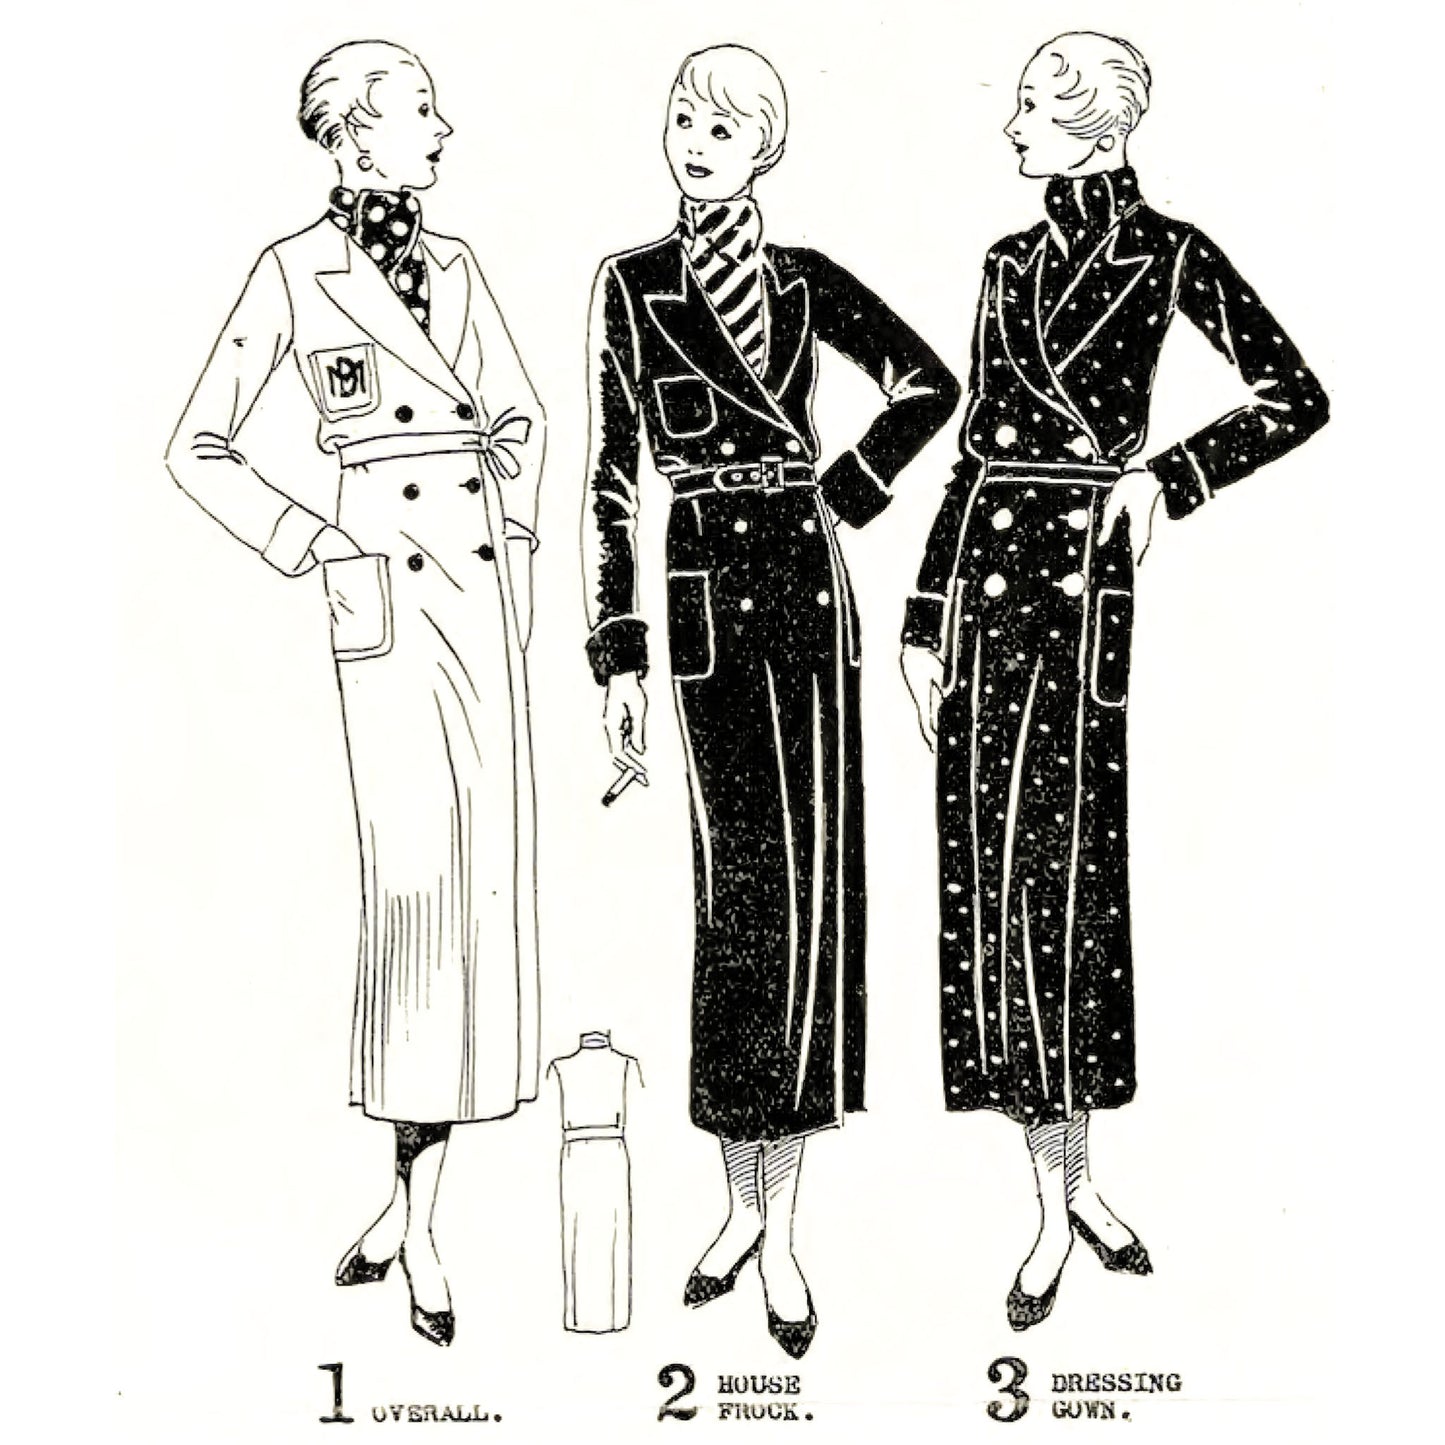 Women wearing overall, house frock and dressing gown.